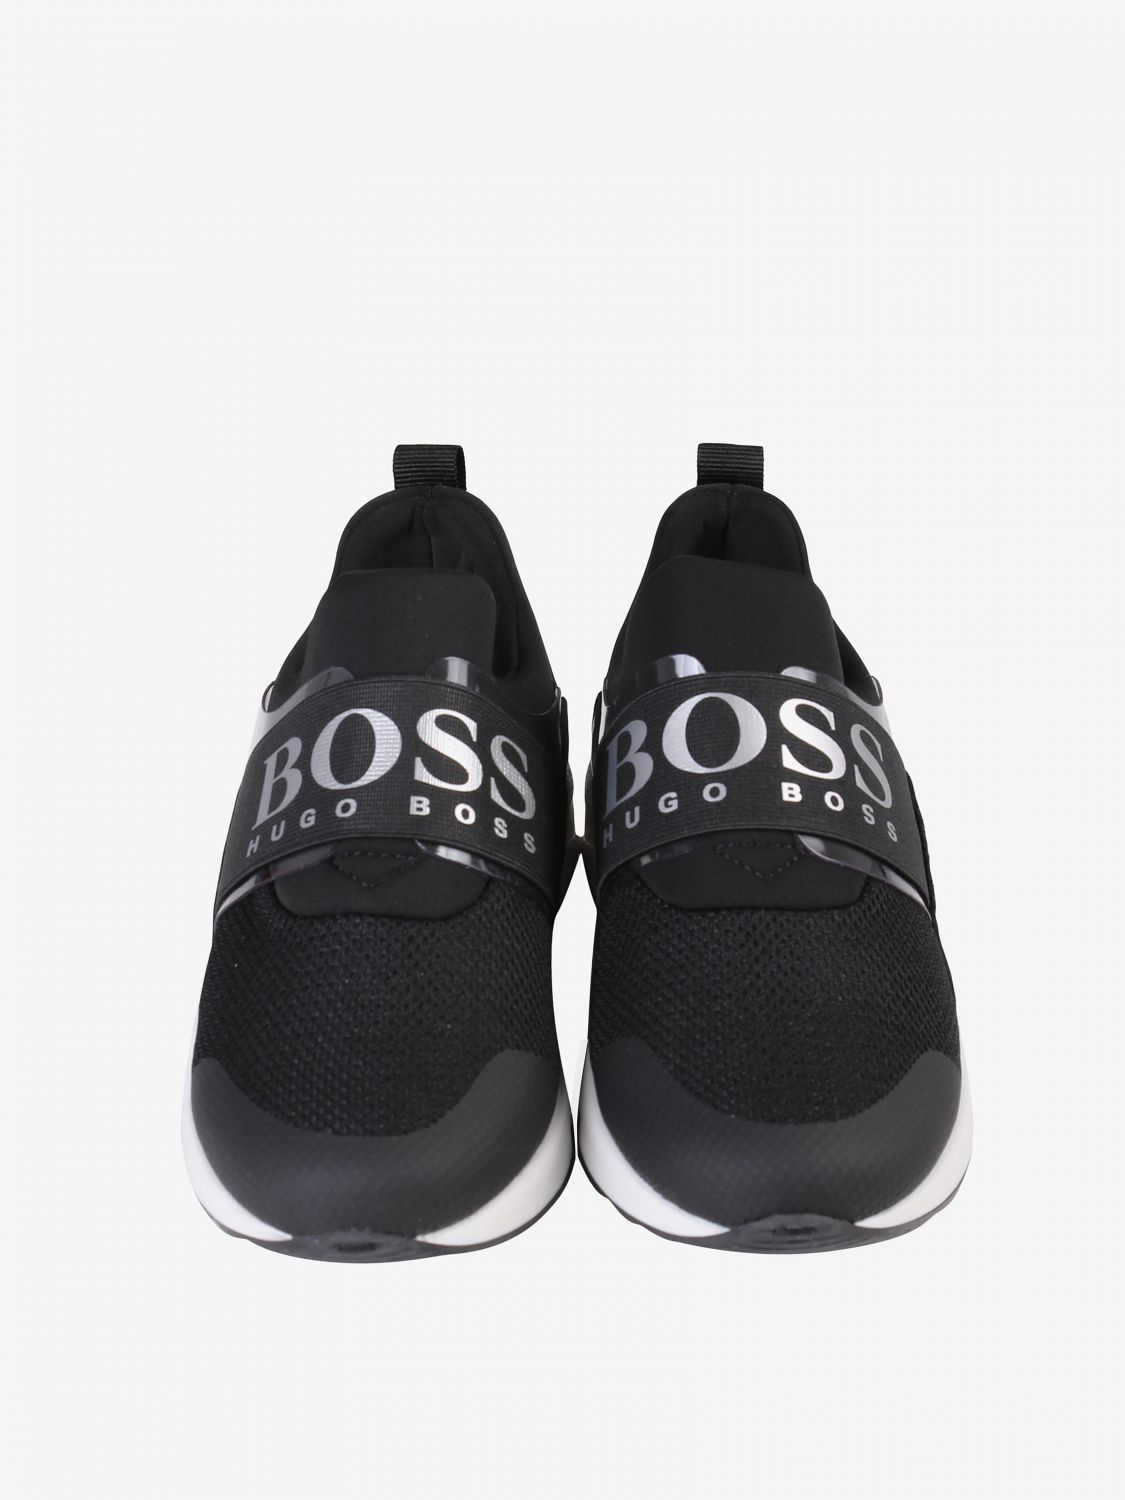 the boss shoes